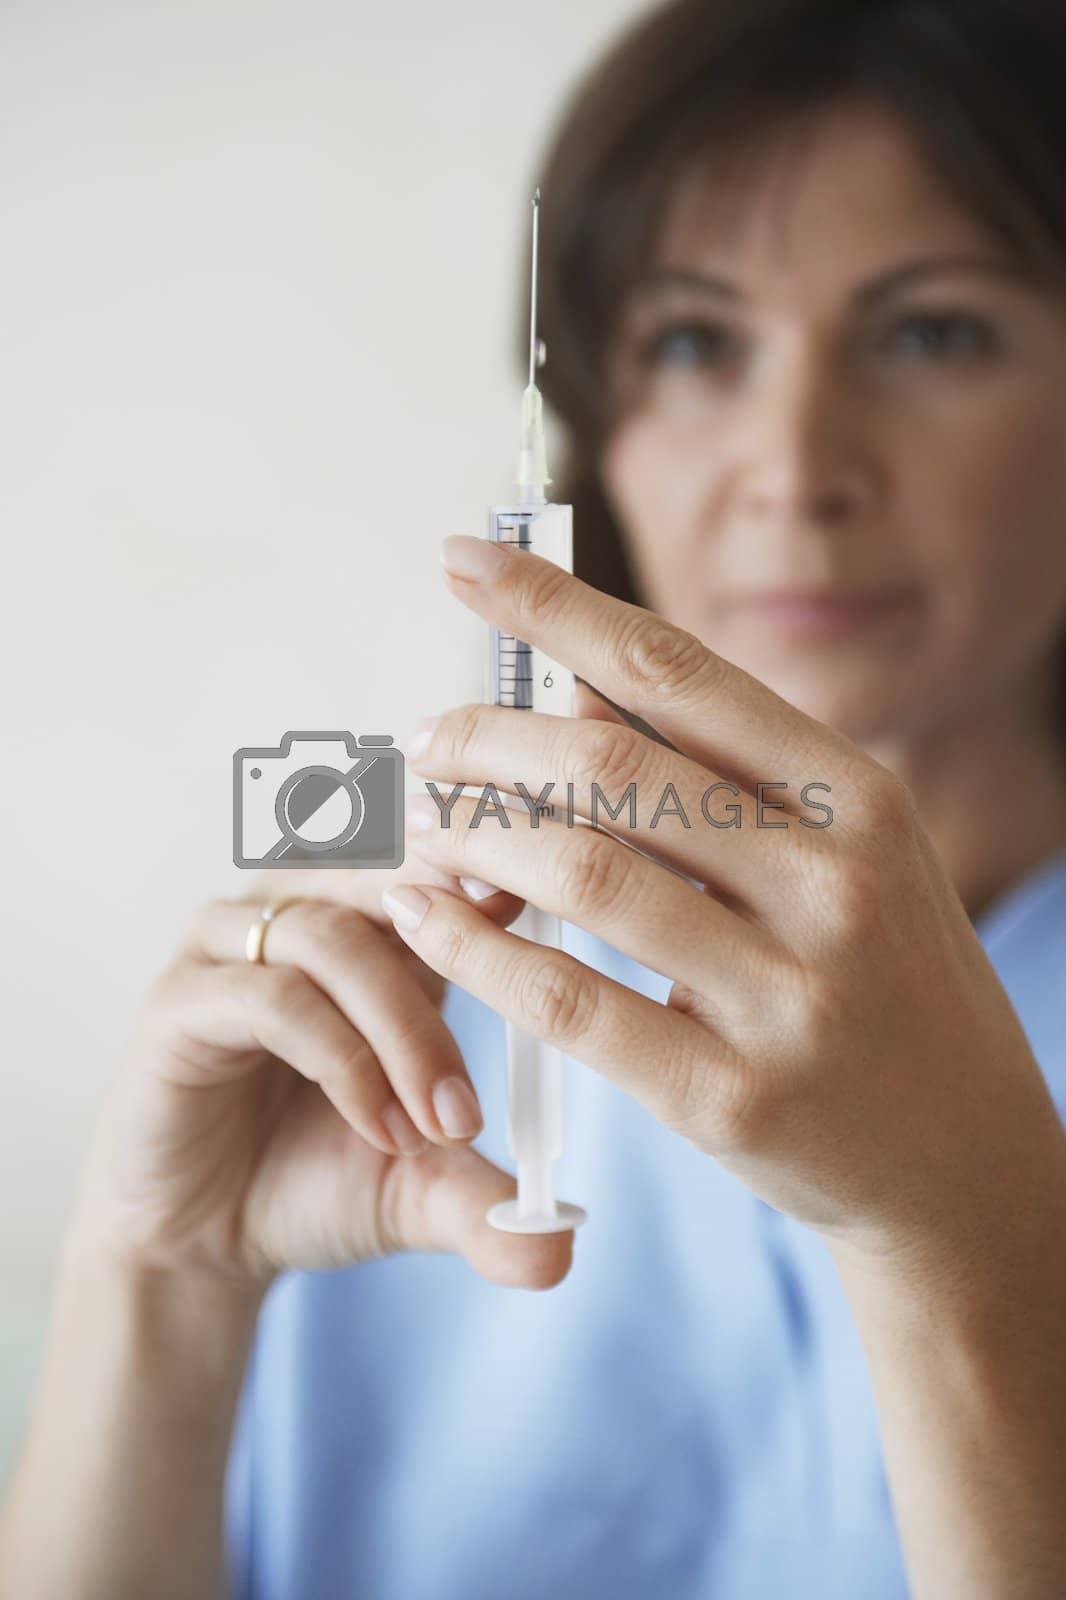 Royalty free image of Nurse Preparing Needle For Injection by moodboard